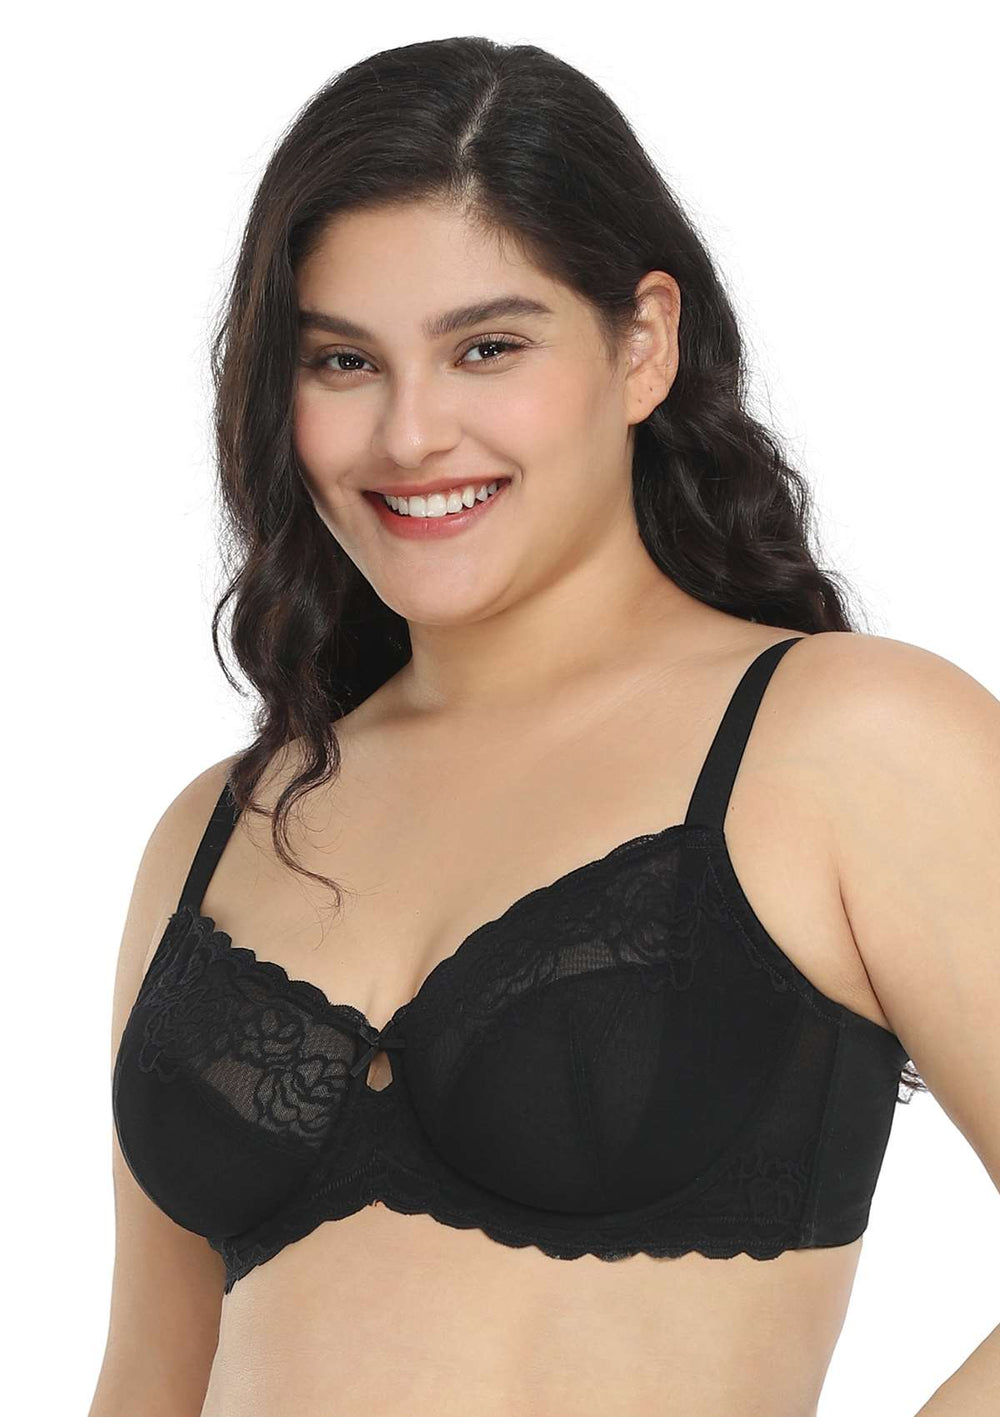  Lasricas Women's Embroidered Unlined Lace Bra Full